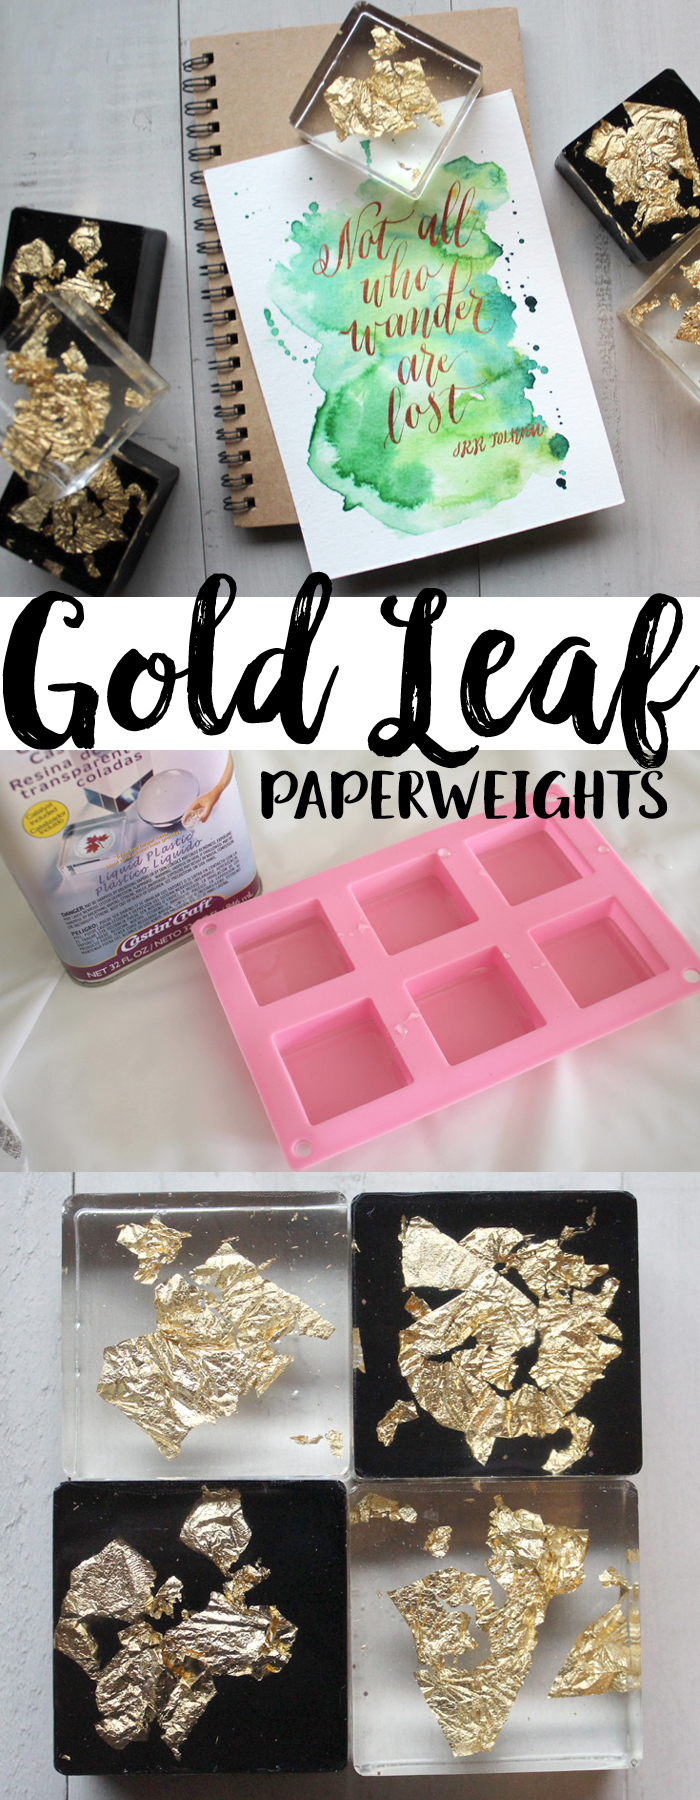 Make a stunning gold leaf paperweight or magnet for the fridge--using clear casting resin.  #resincraftsblog #resincrafts via @resincraftsblog